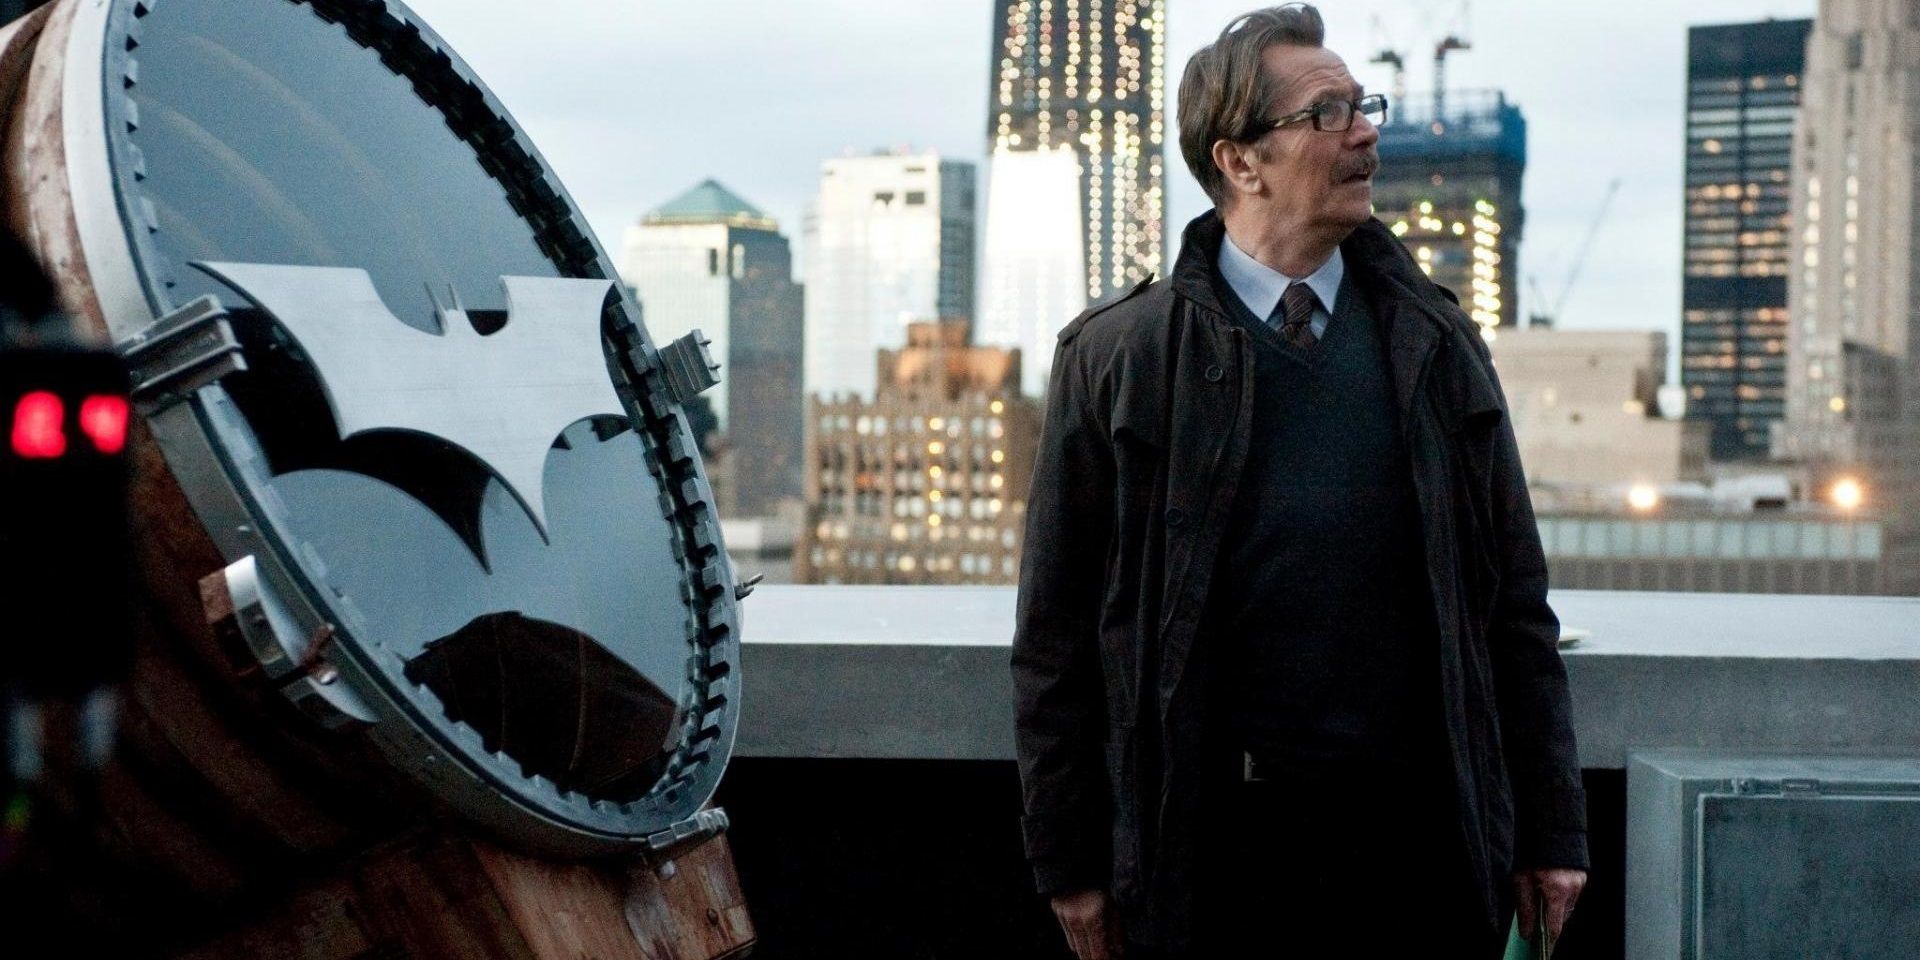 Gary Oldman as Commissioner Gordon standing next to the Bat-Signal